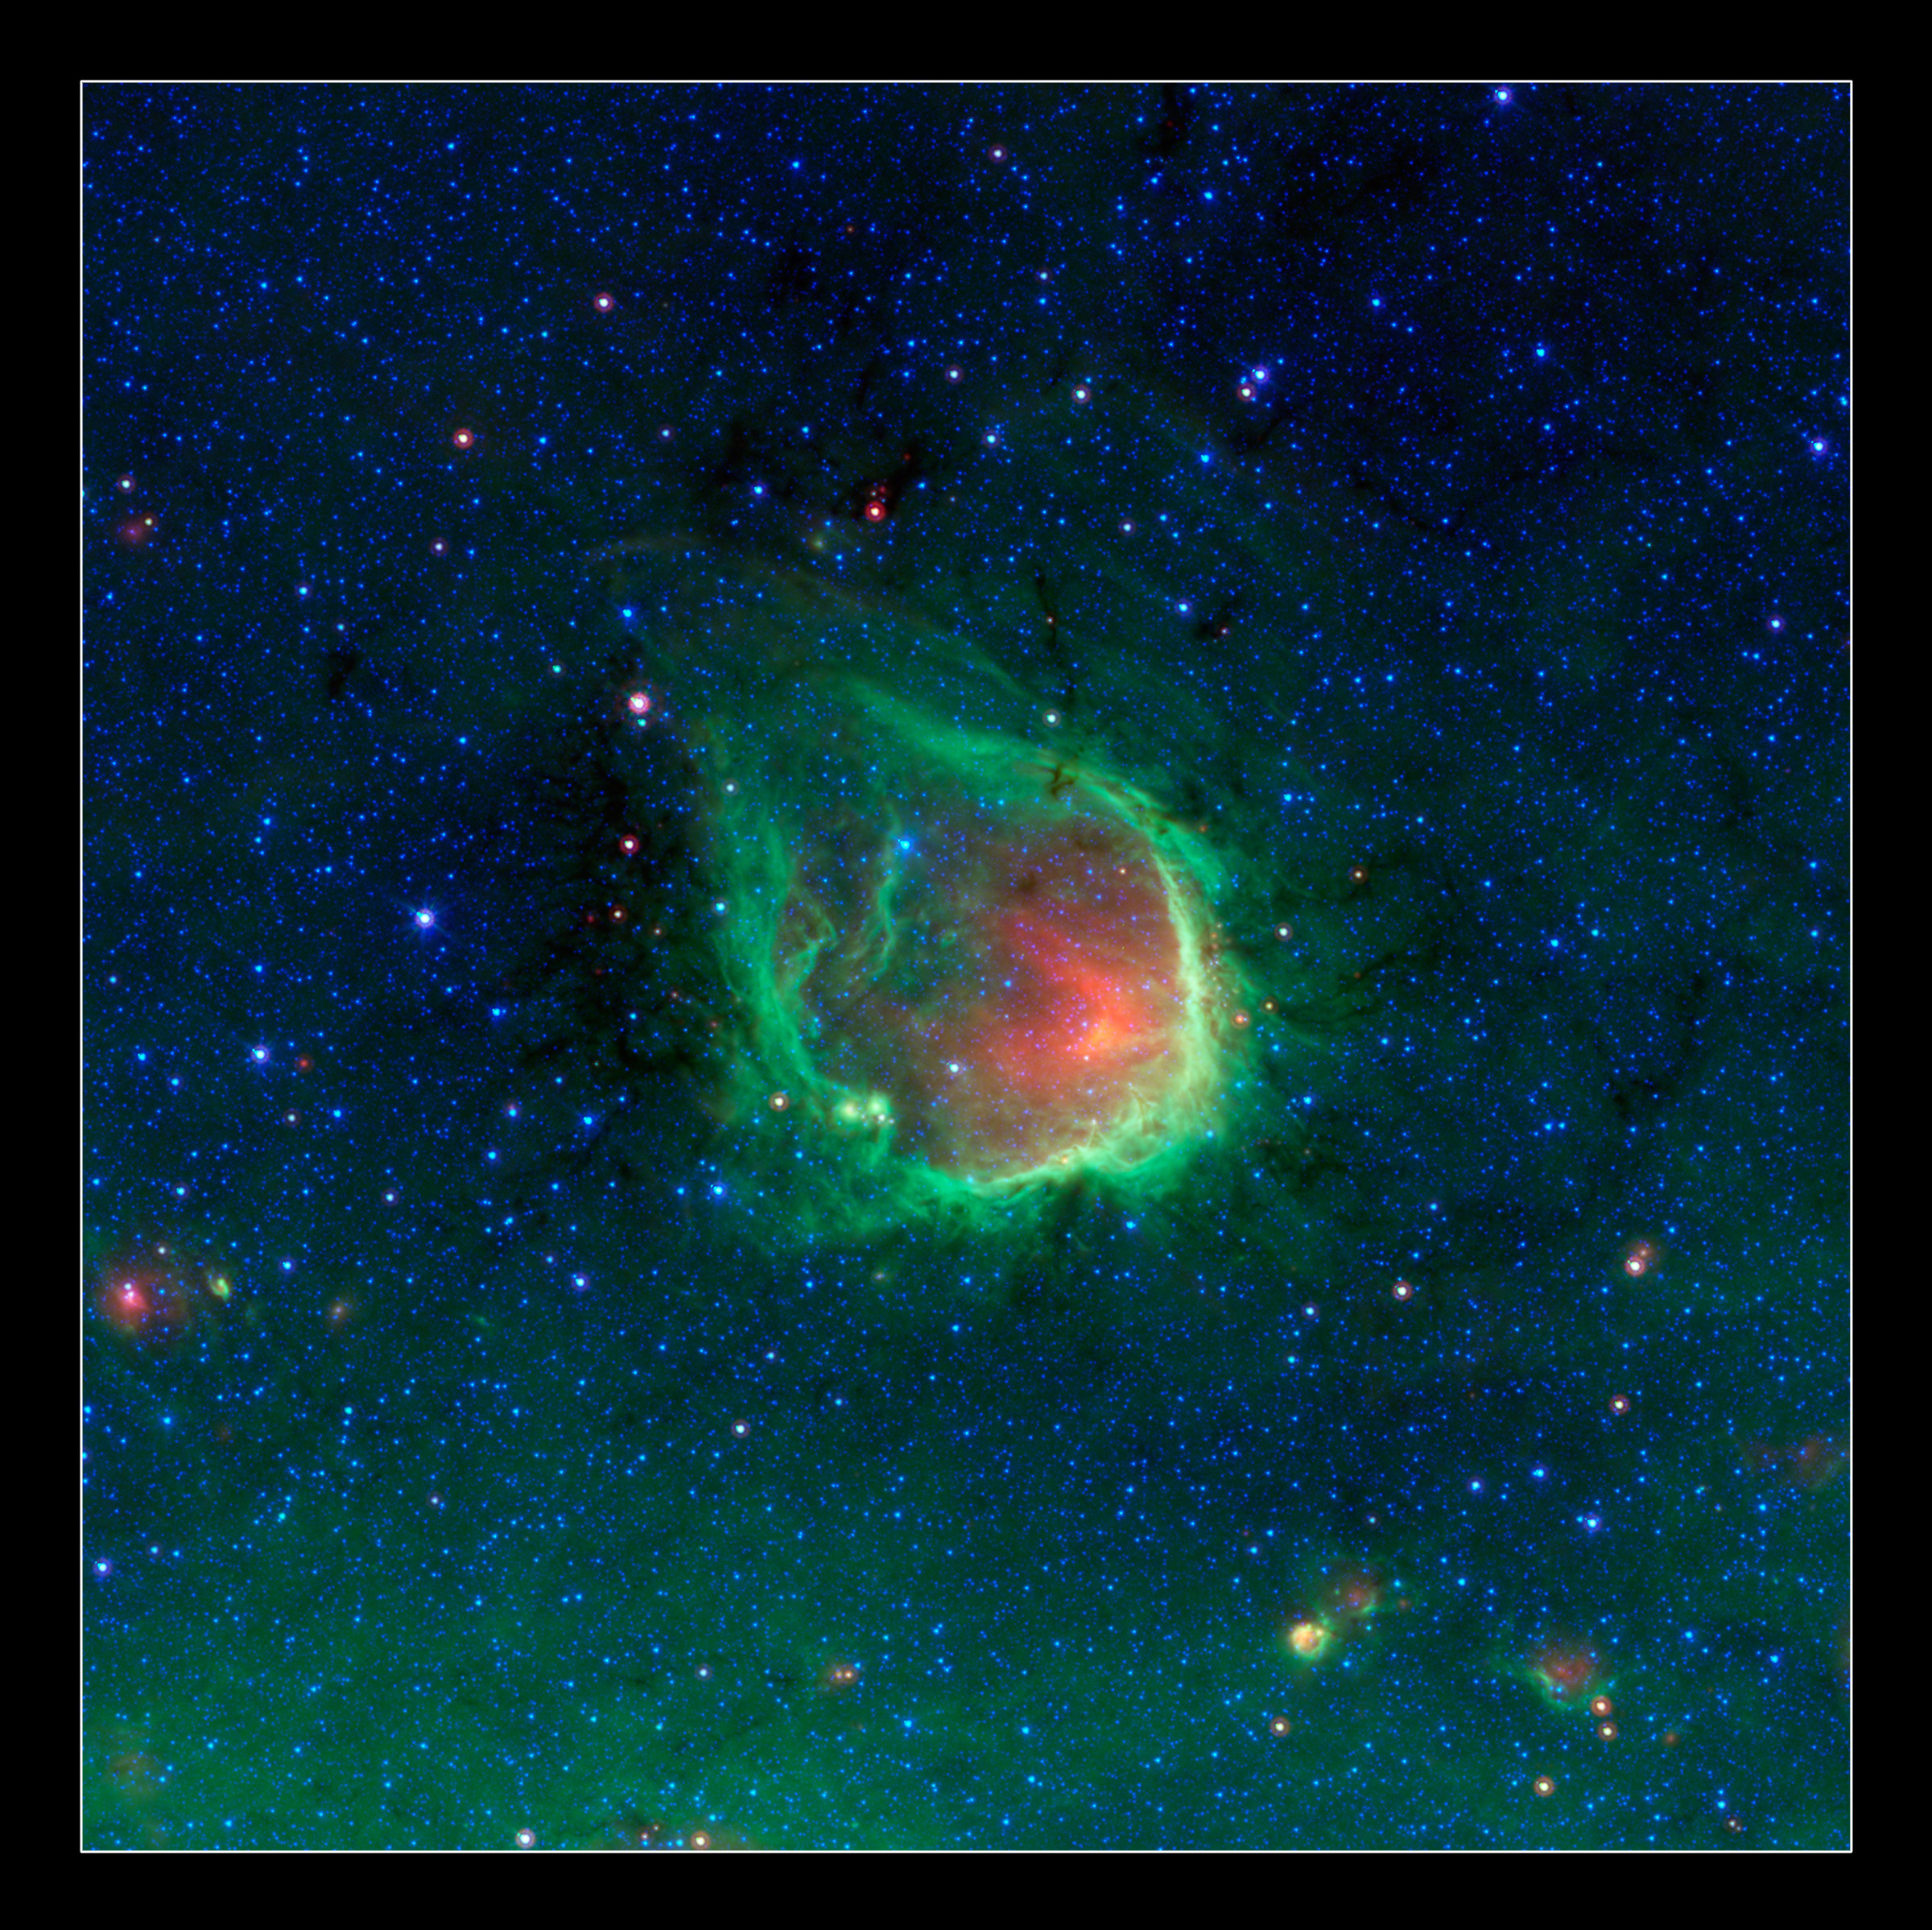 This glowing emerald nebula seen by Spitzer is reminiscent of the glowing ring wielded by the superhero Green Lantern. Astronomers believe rings like this are actually sculpted by the powerful light of giant “O” stars. Named RCW 120 by astronomers, this region of hot gas and glowing dust can be found in the constellation Scorpius. Image: NASA/JPL-Caltech/GLIMPSE-MIPSGAL Teams